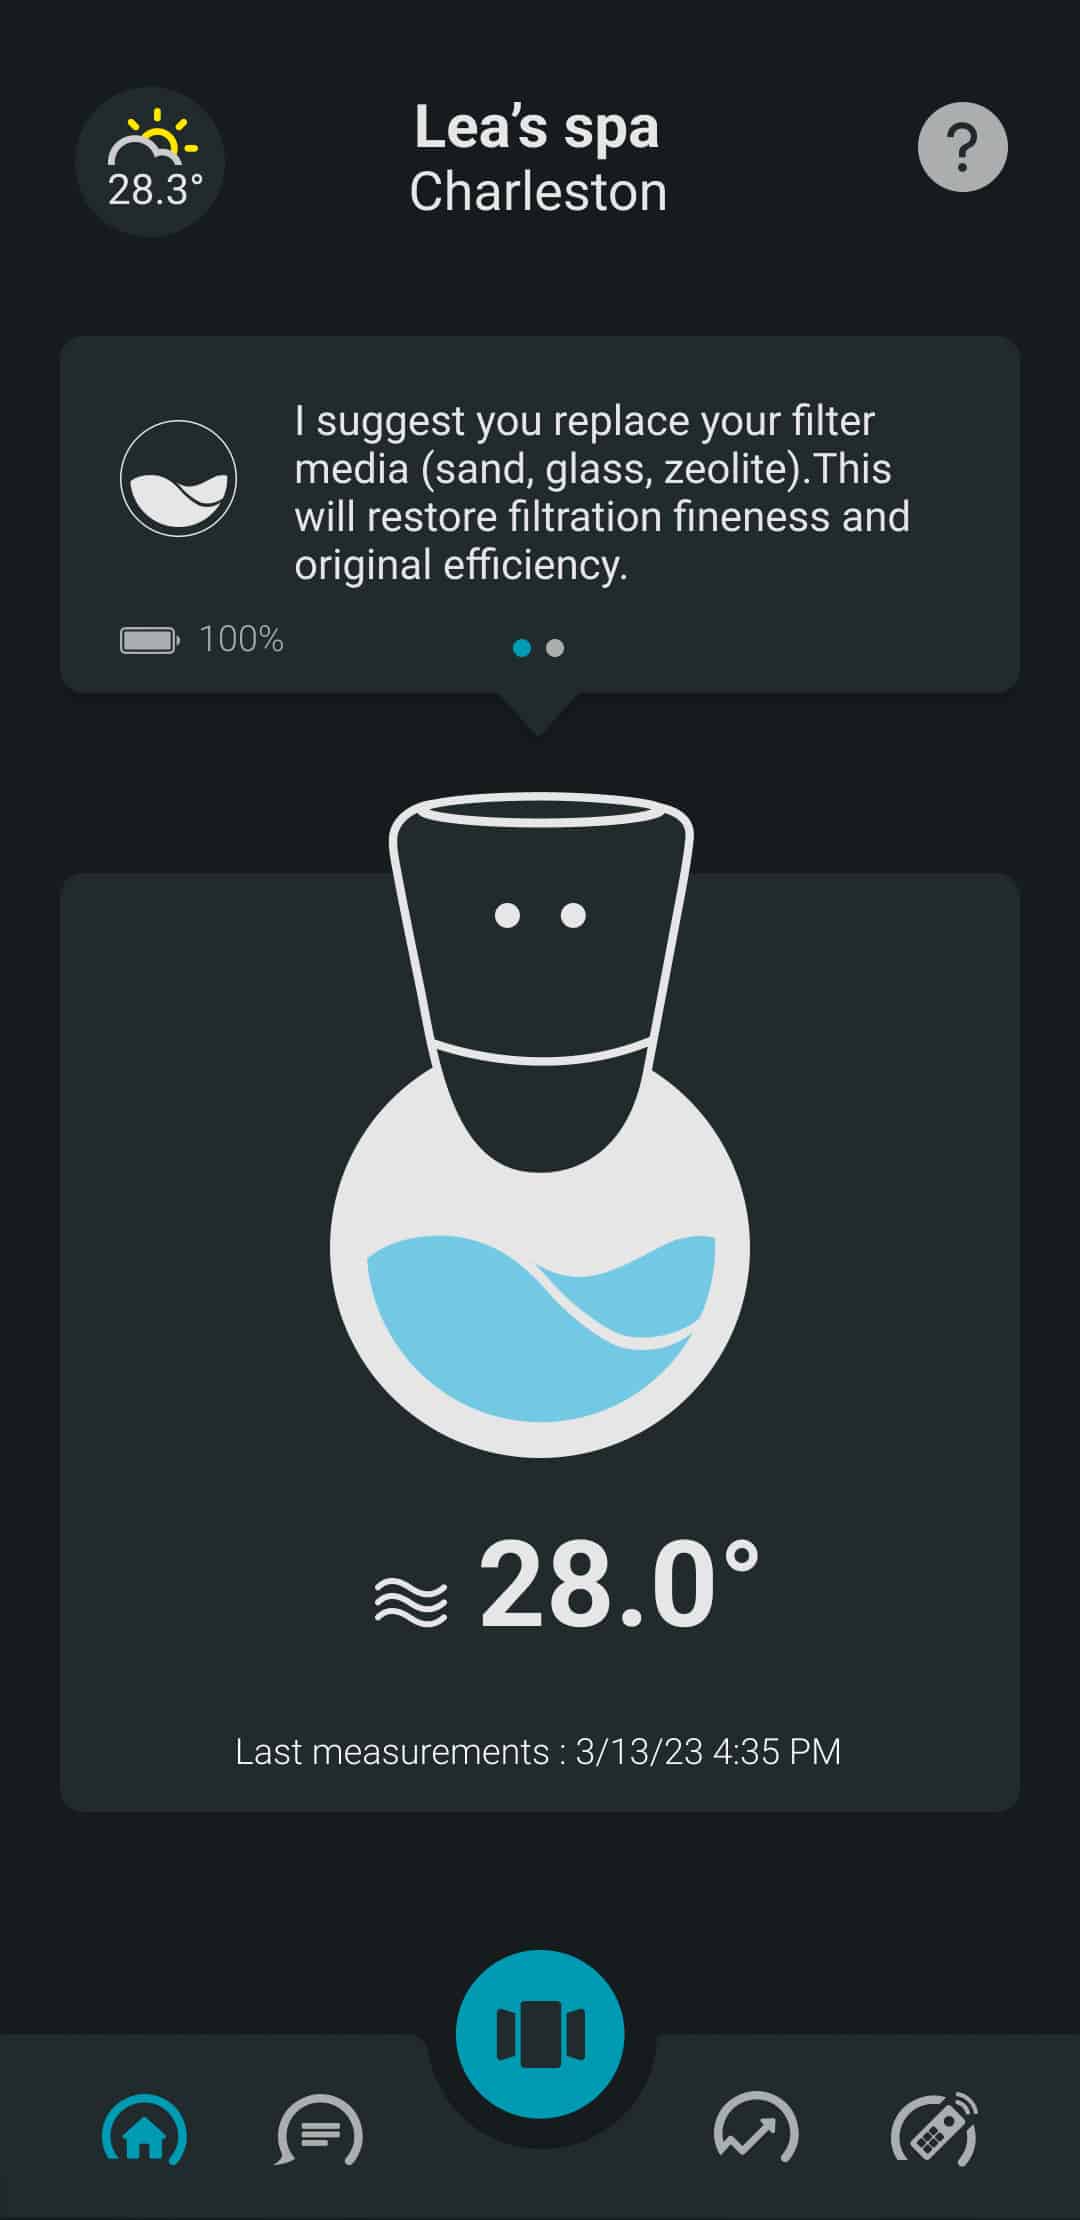 image of the ICO spa mobile application that detects when the water filter needs changing and sends a recommendation to the user.